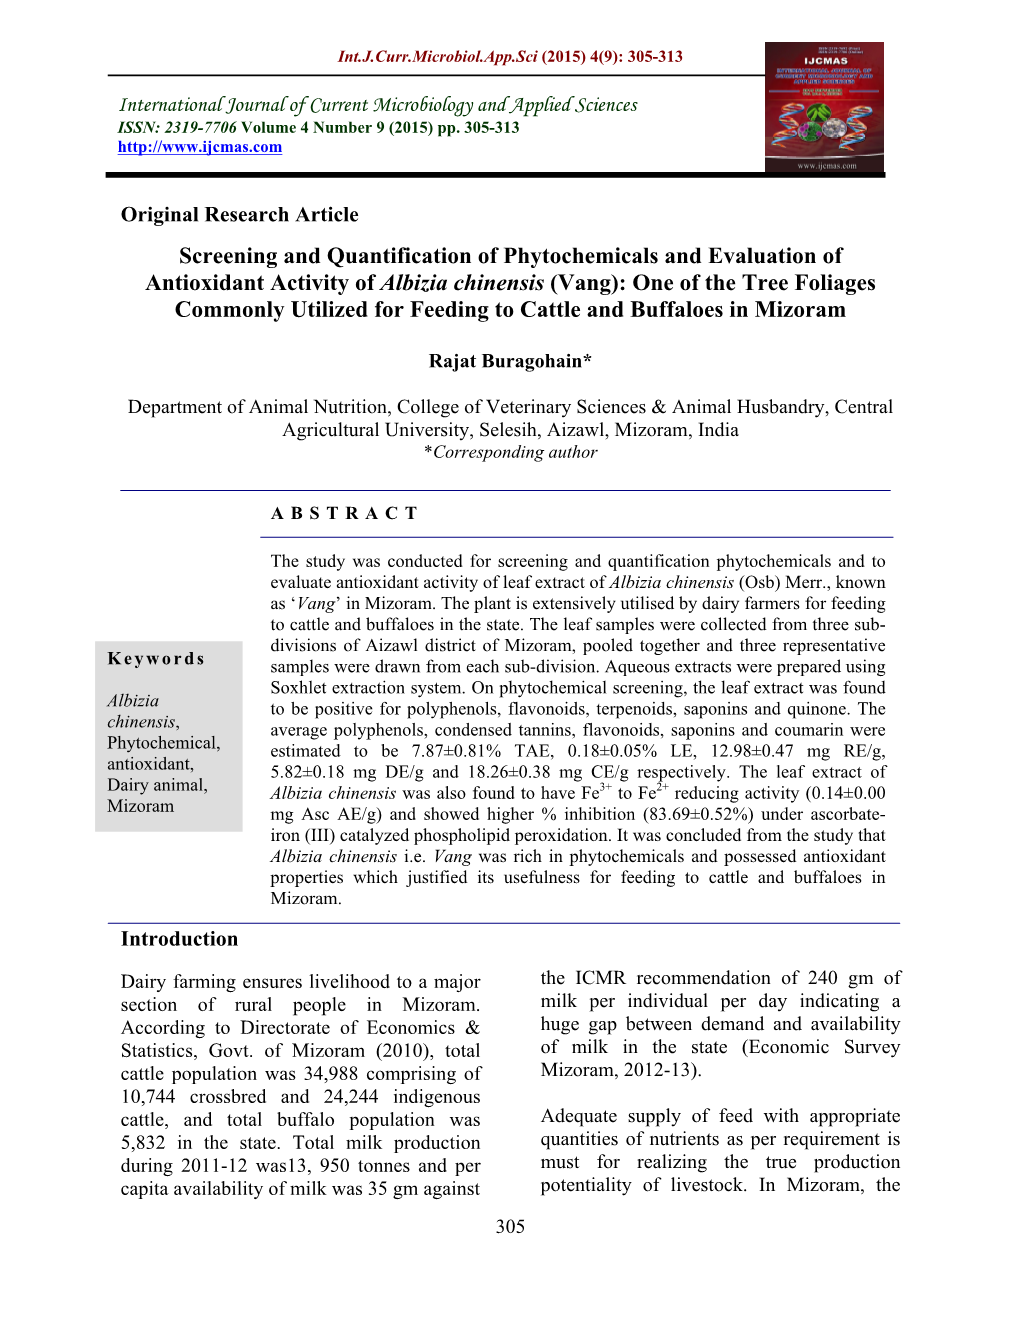 Screening and Quantification of Phytochemicals and Evaluation Of